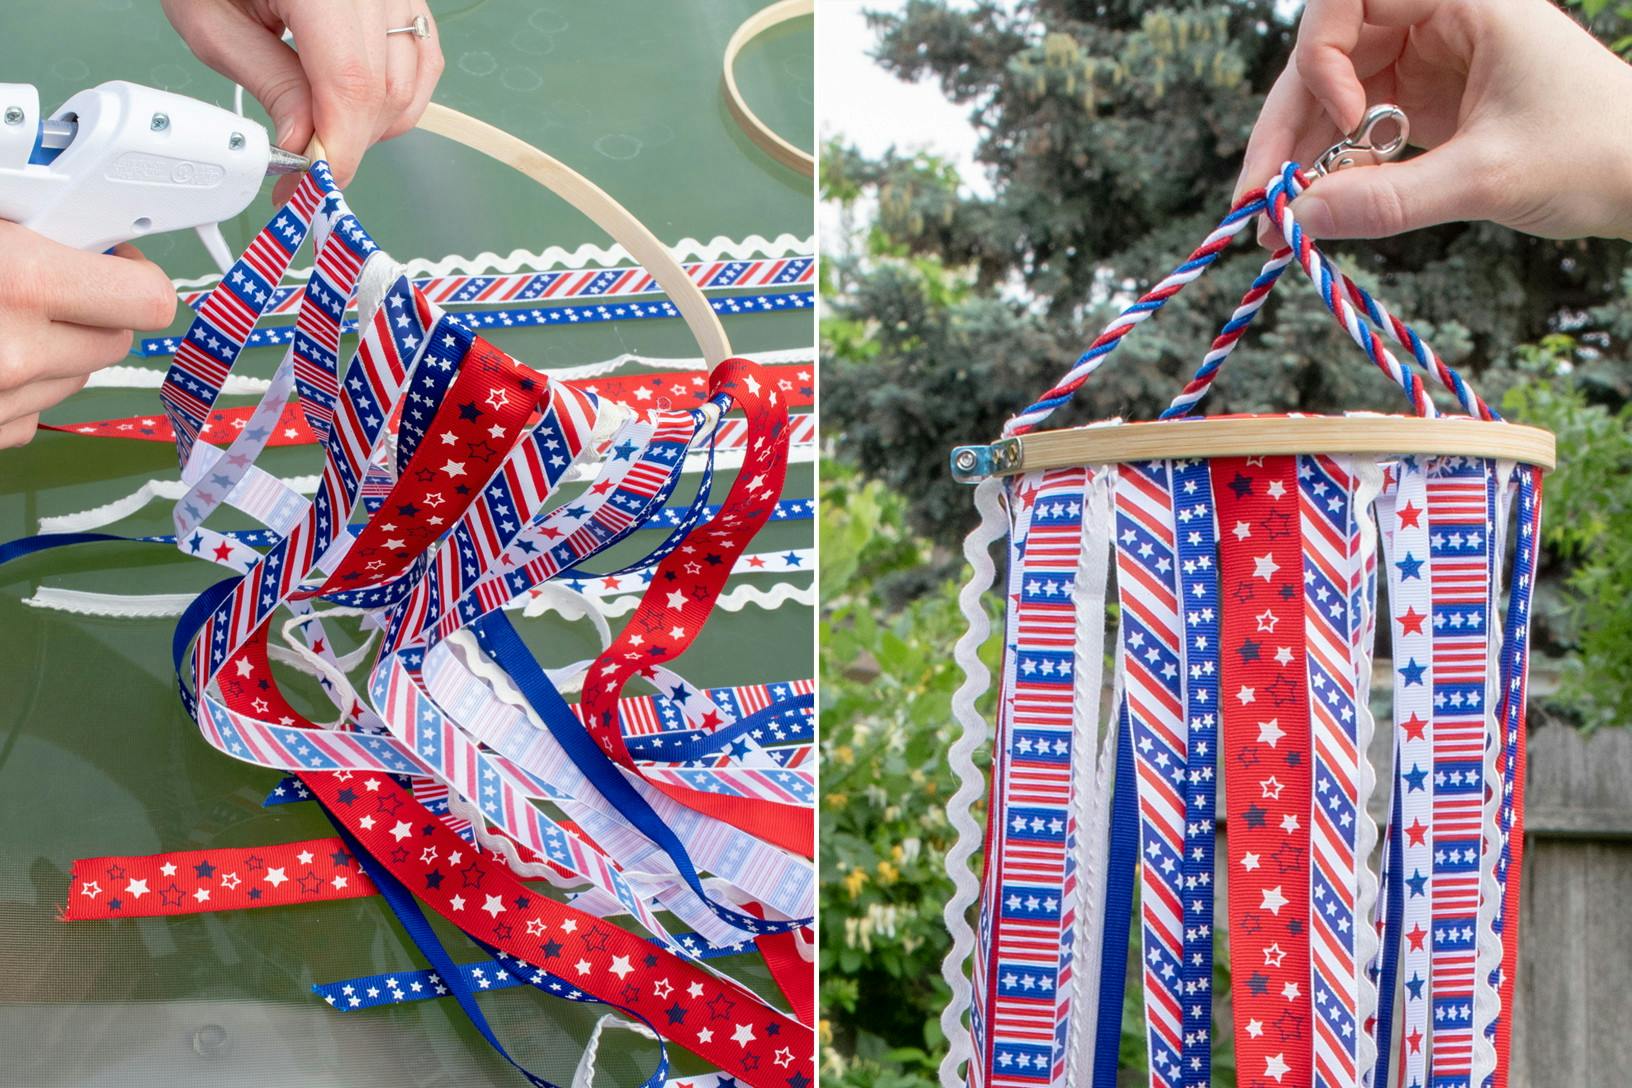 A person hot gluing red, white, and blue patterned ribbons to an embroidery hoop, and holding up the completed windsock.